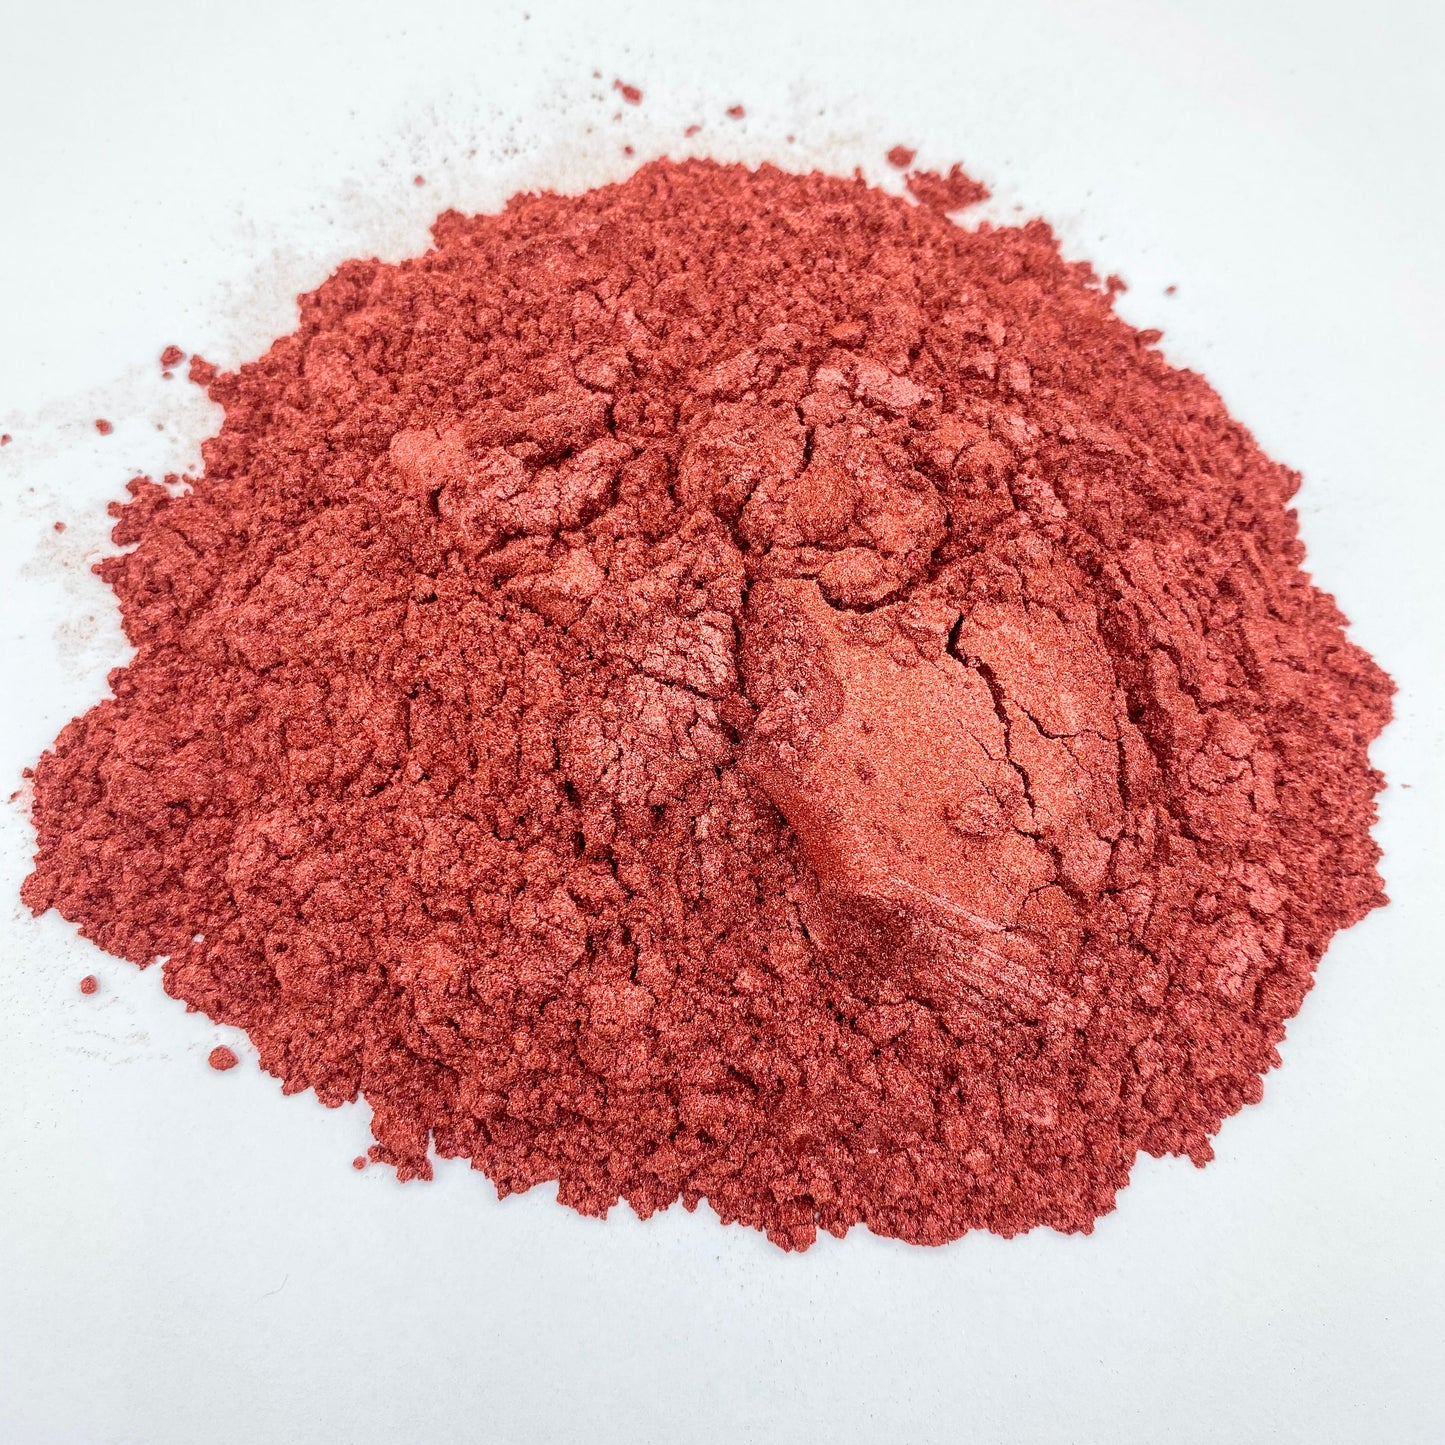 Astro Dust Rusty Red Color Pigment - Patrick Adair Supplies